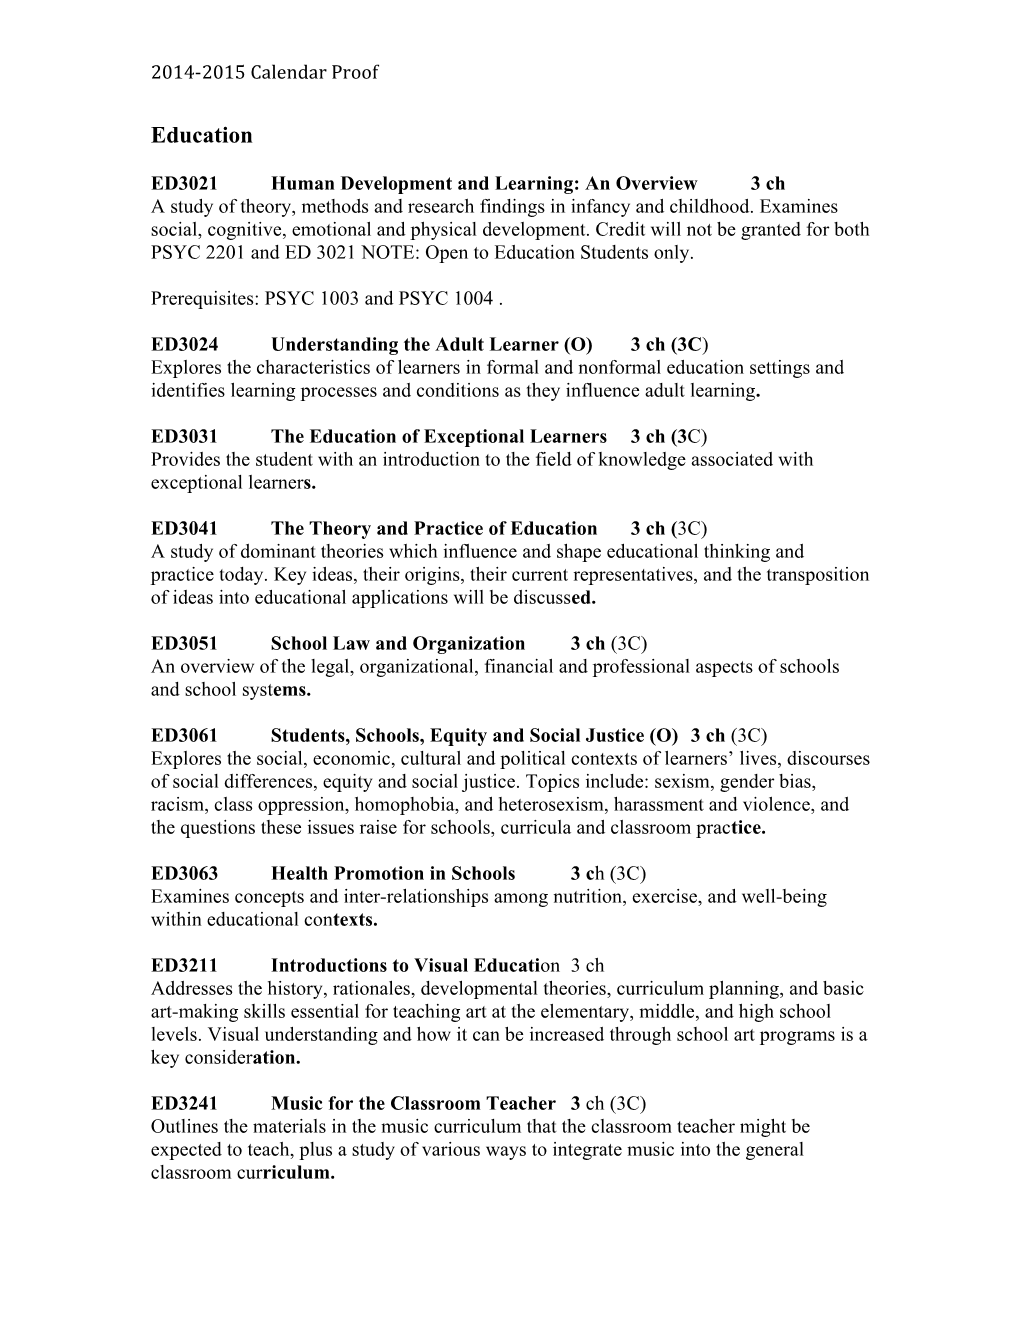 Ed3021human Development and Learning: an Overview3 Ch